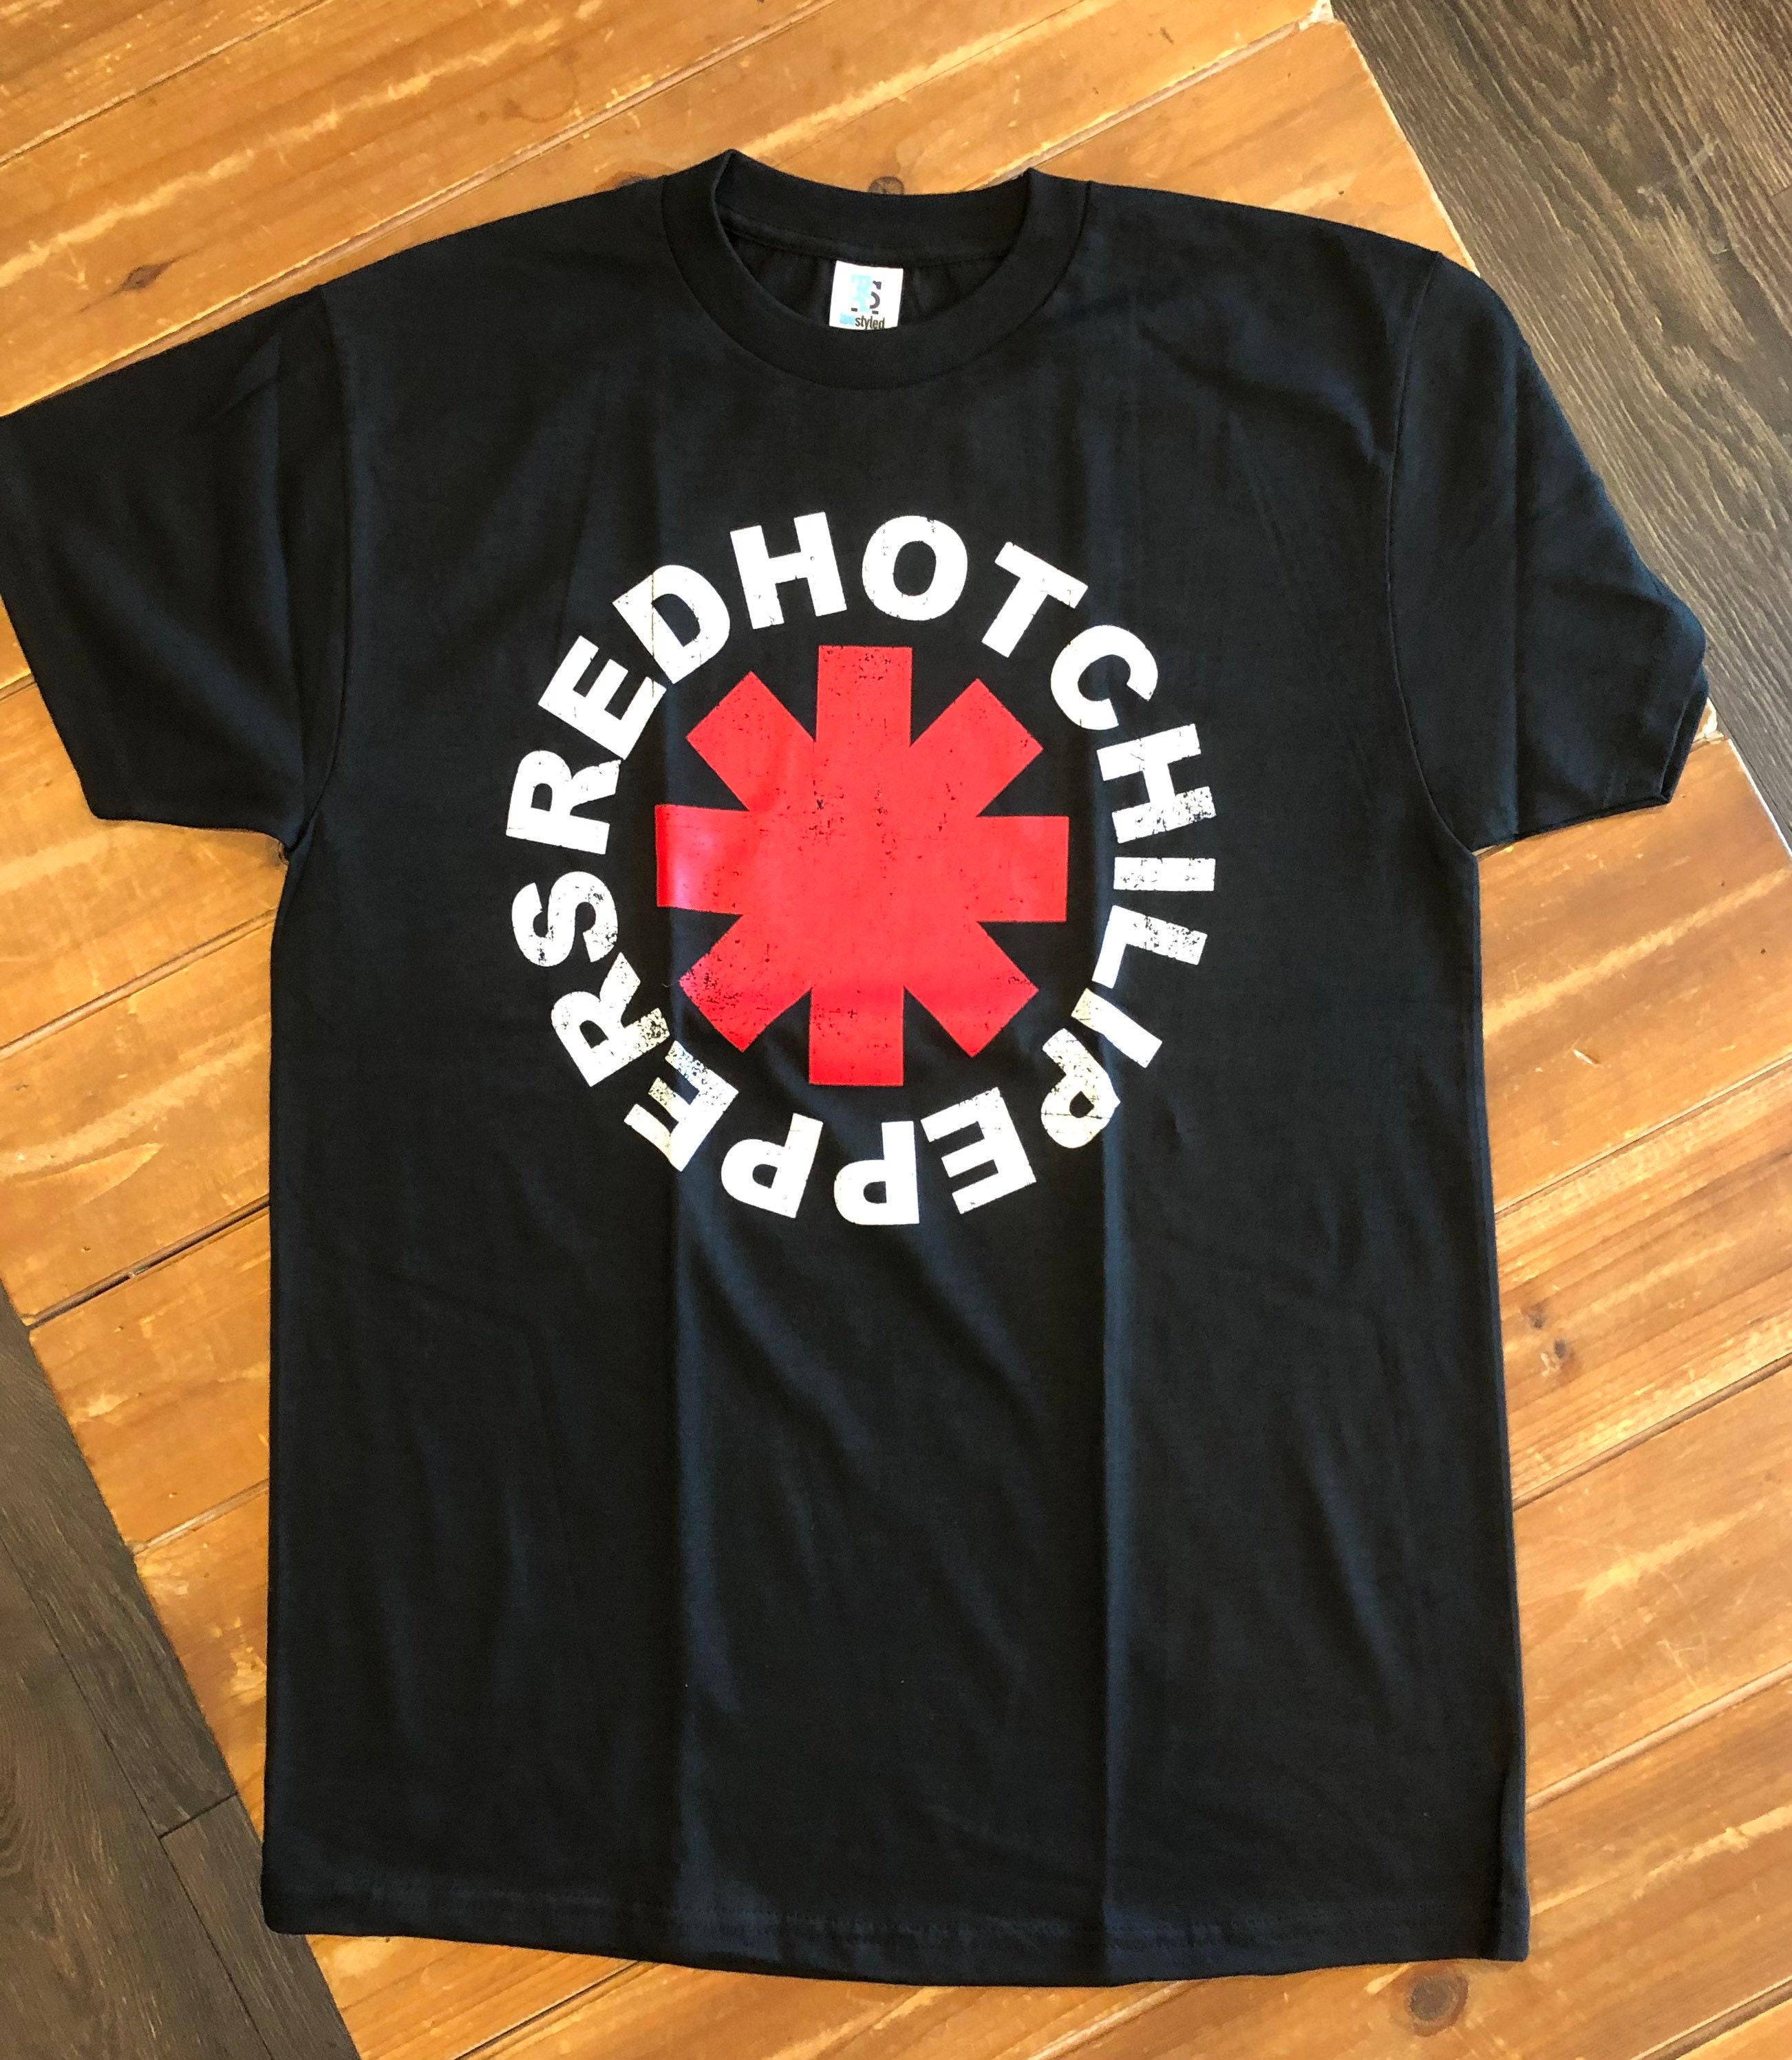 Red Hot Chili Peppers res asterisk logo | Etsy